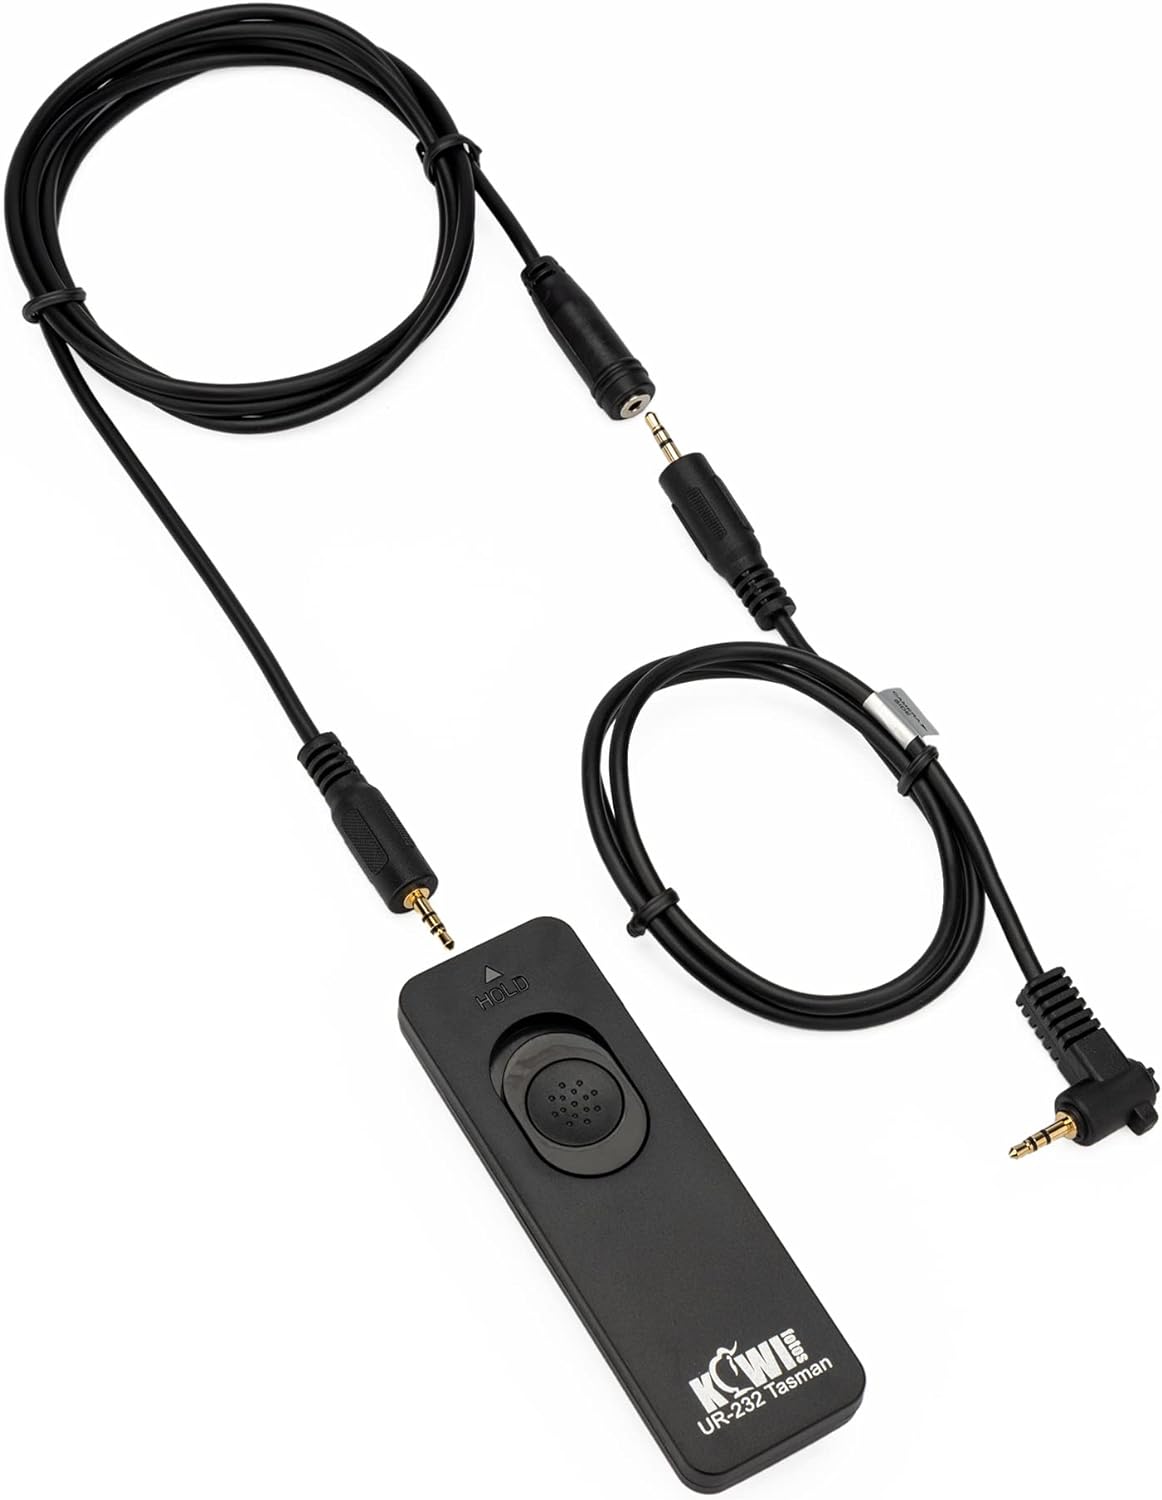 Remote Shutter Release for Event Photography